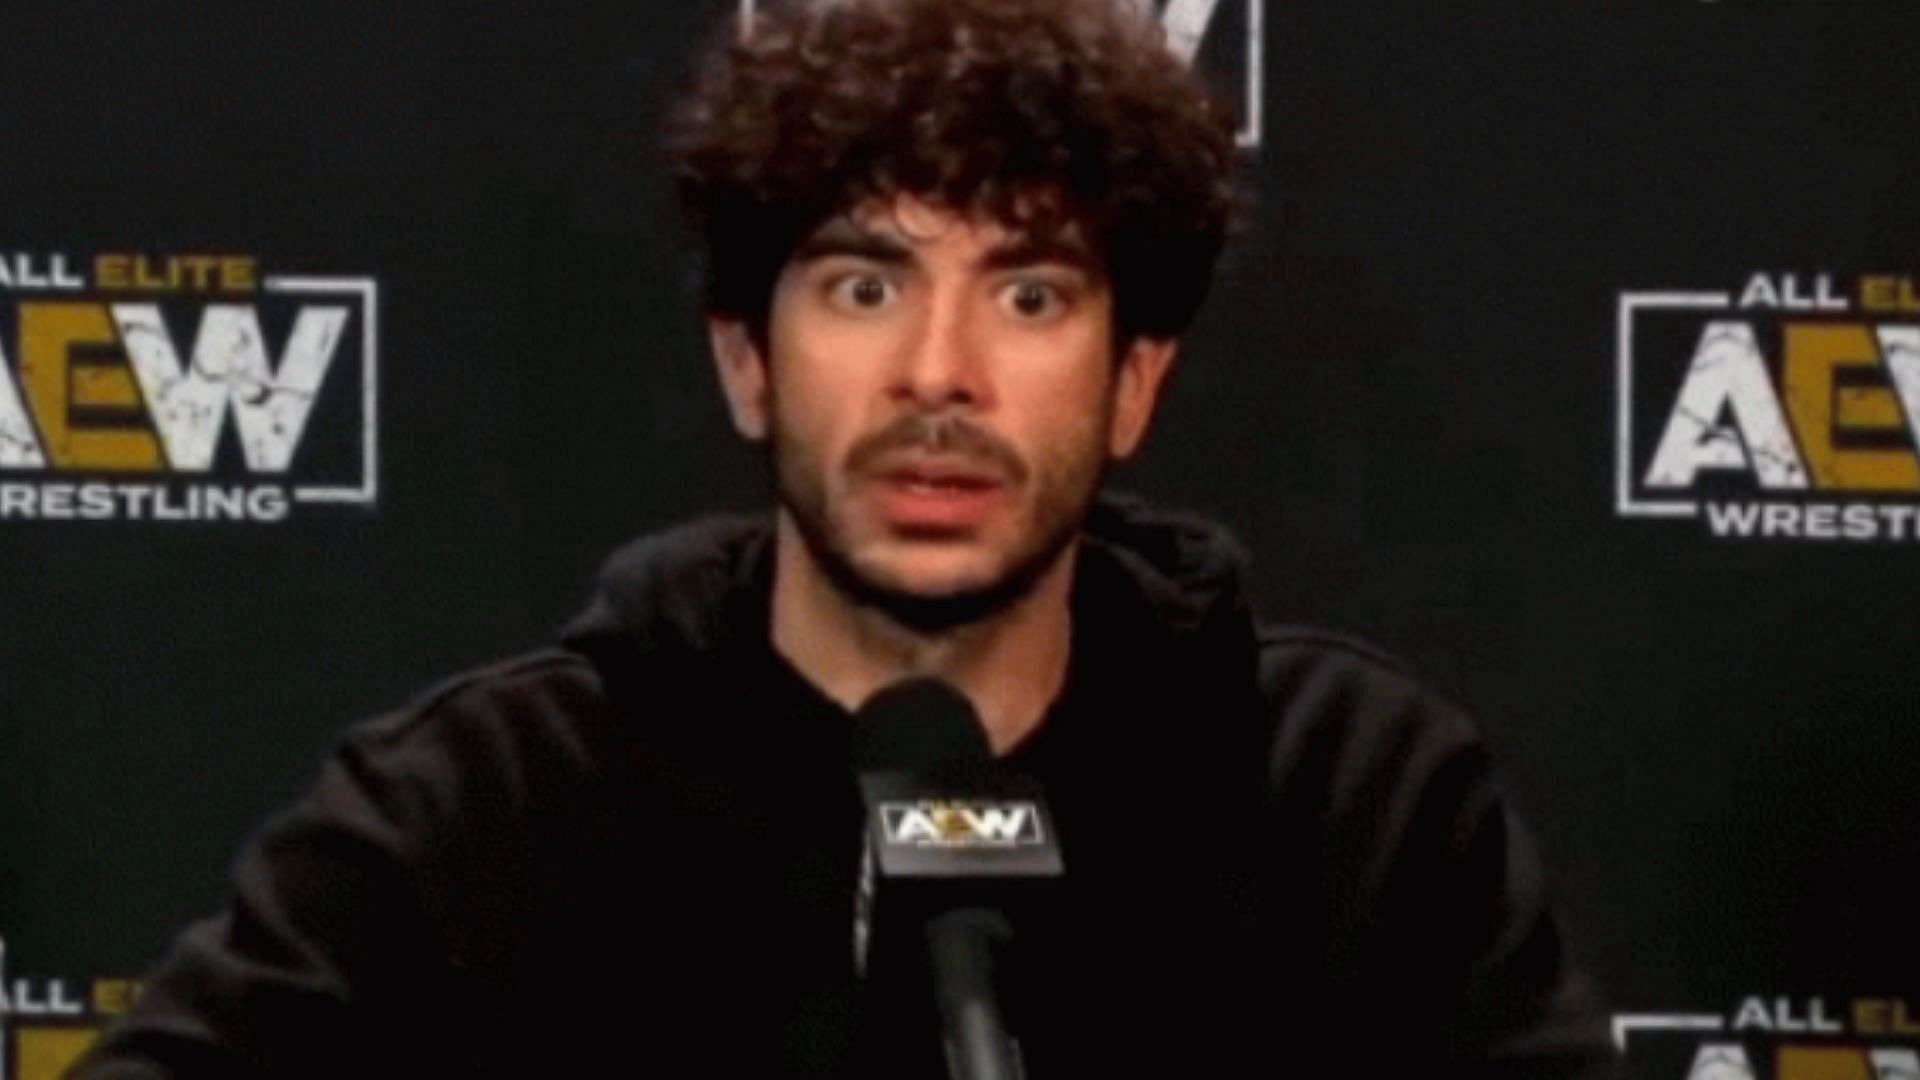 Tony Khan is the CEO and Head of creative of All Elite Wrestling